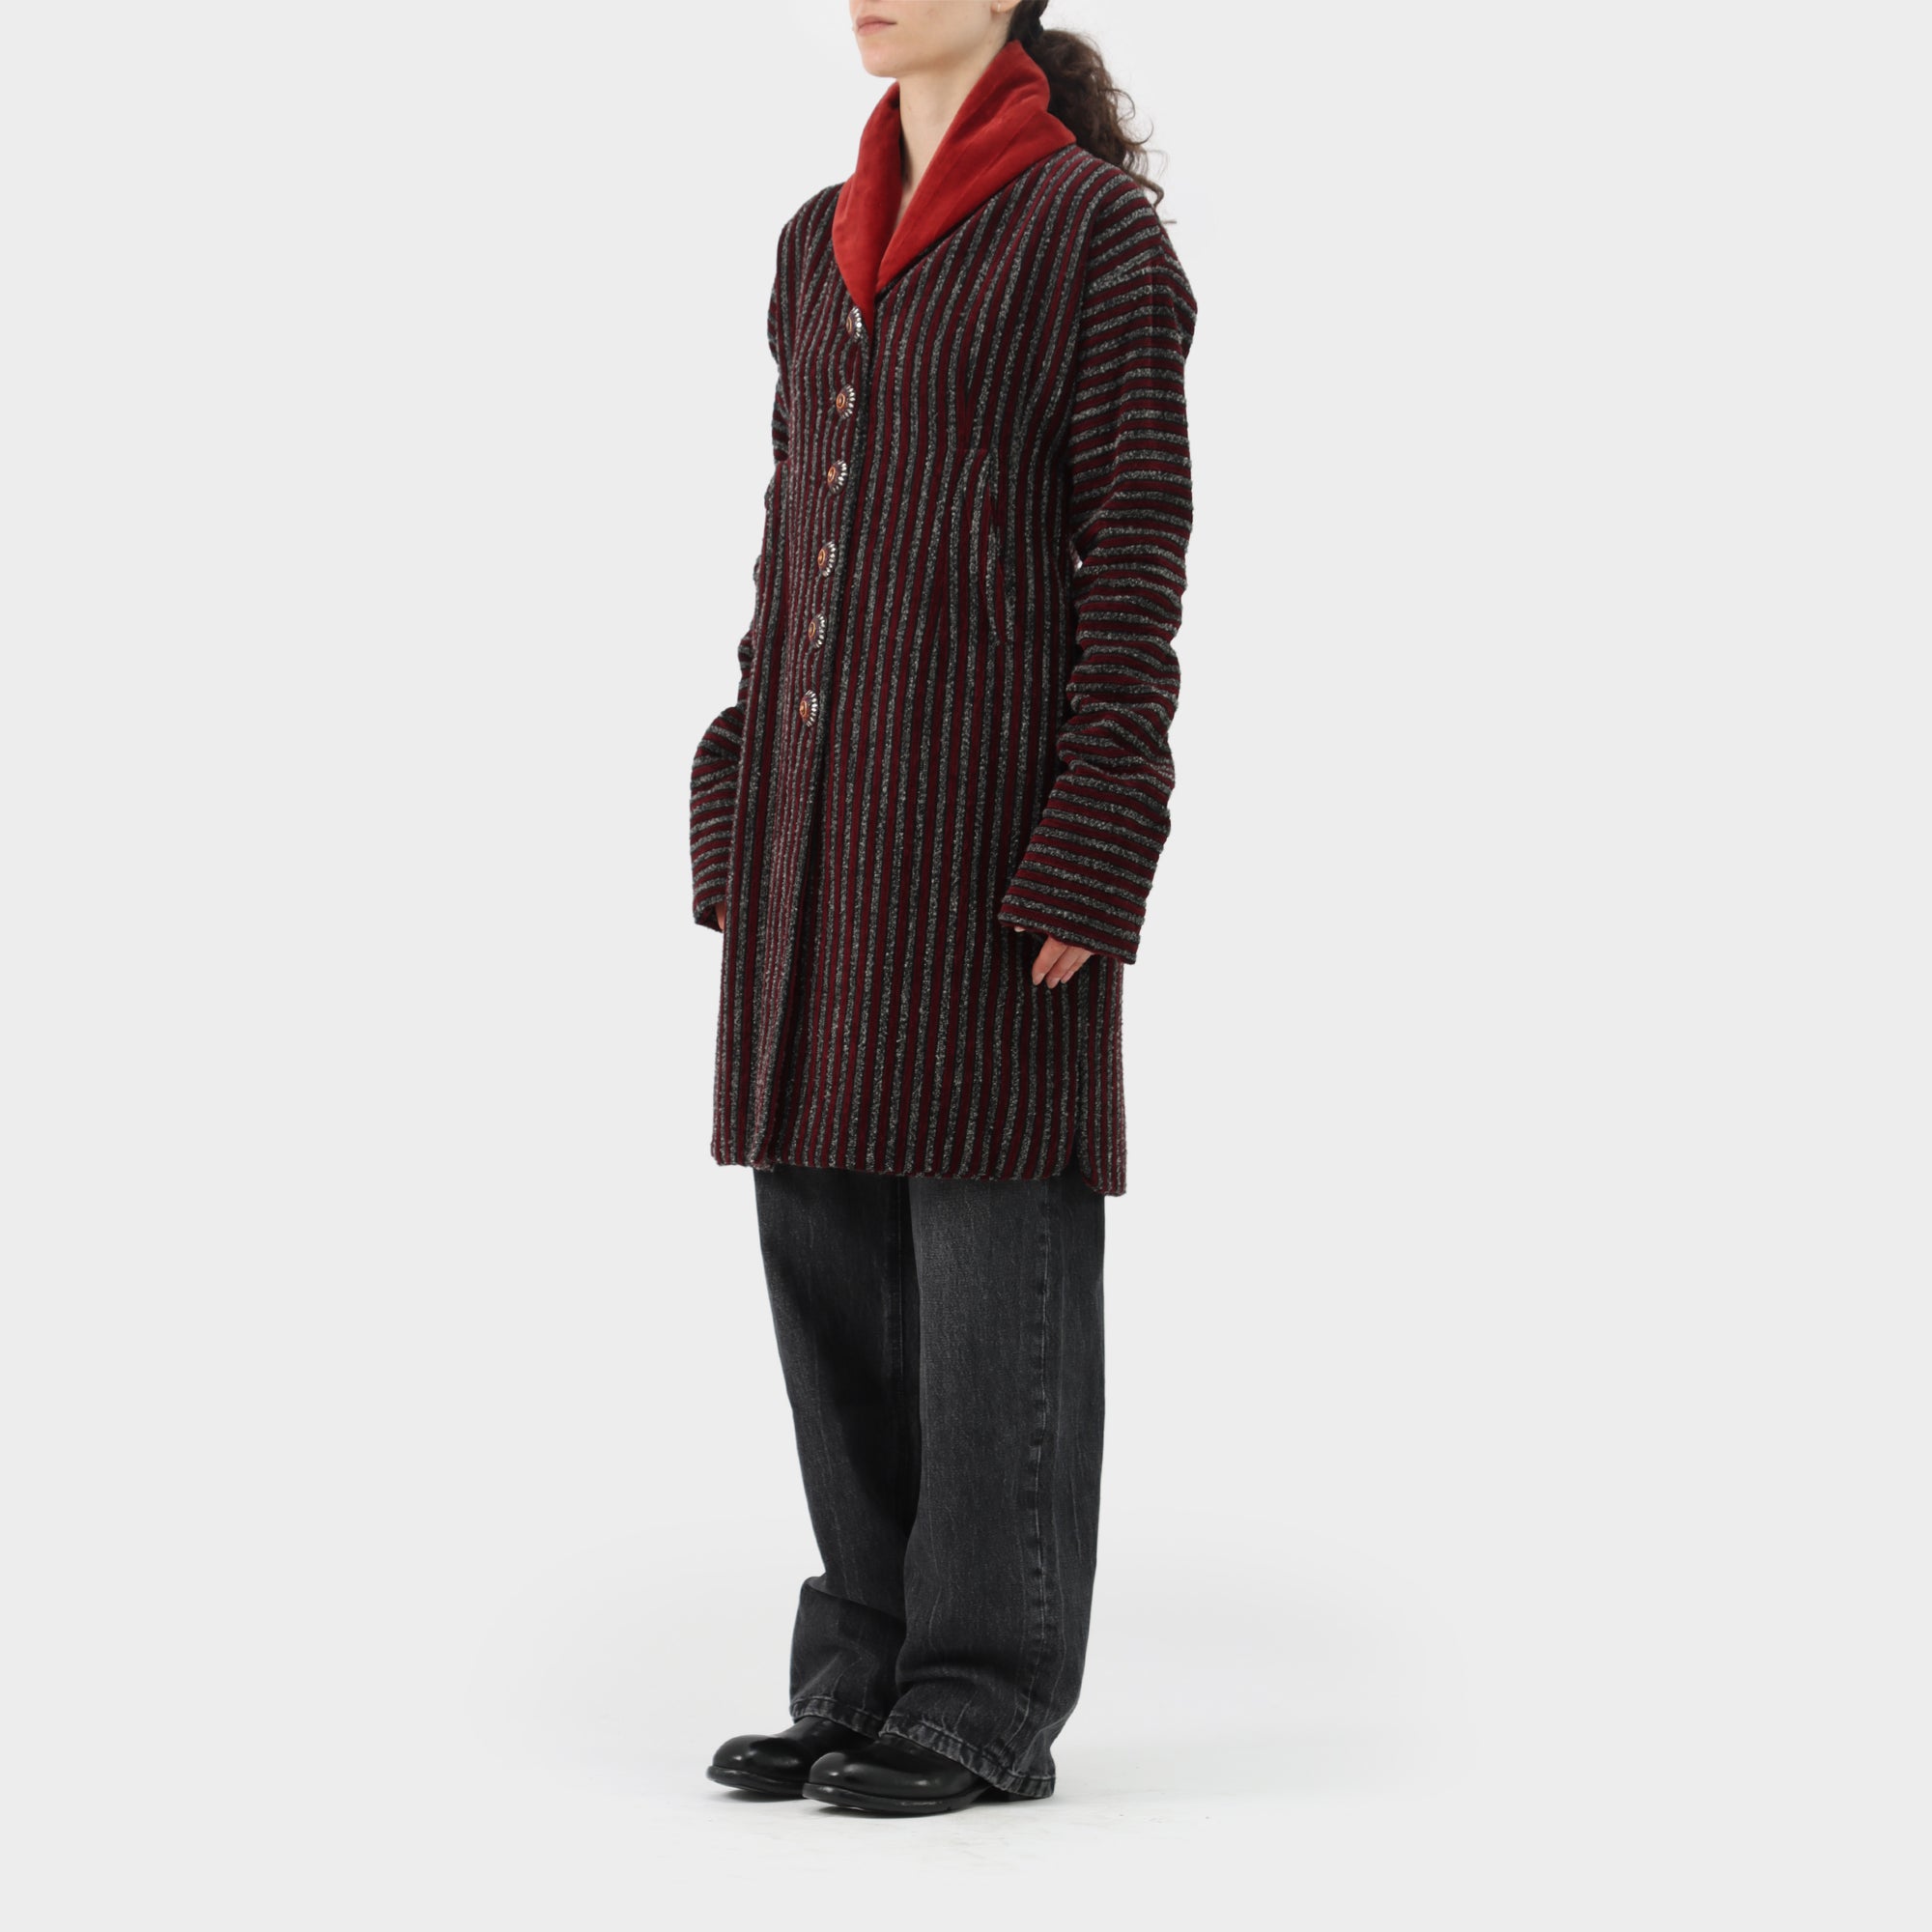 Romeo Gigli Striped Wool Coat with Embellished Buttons